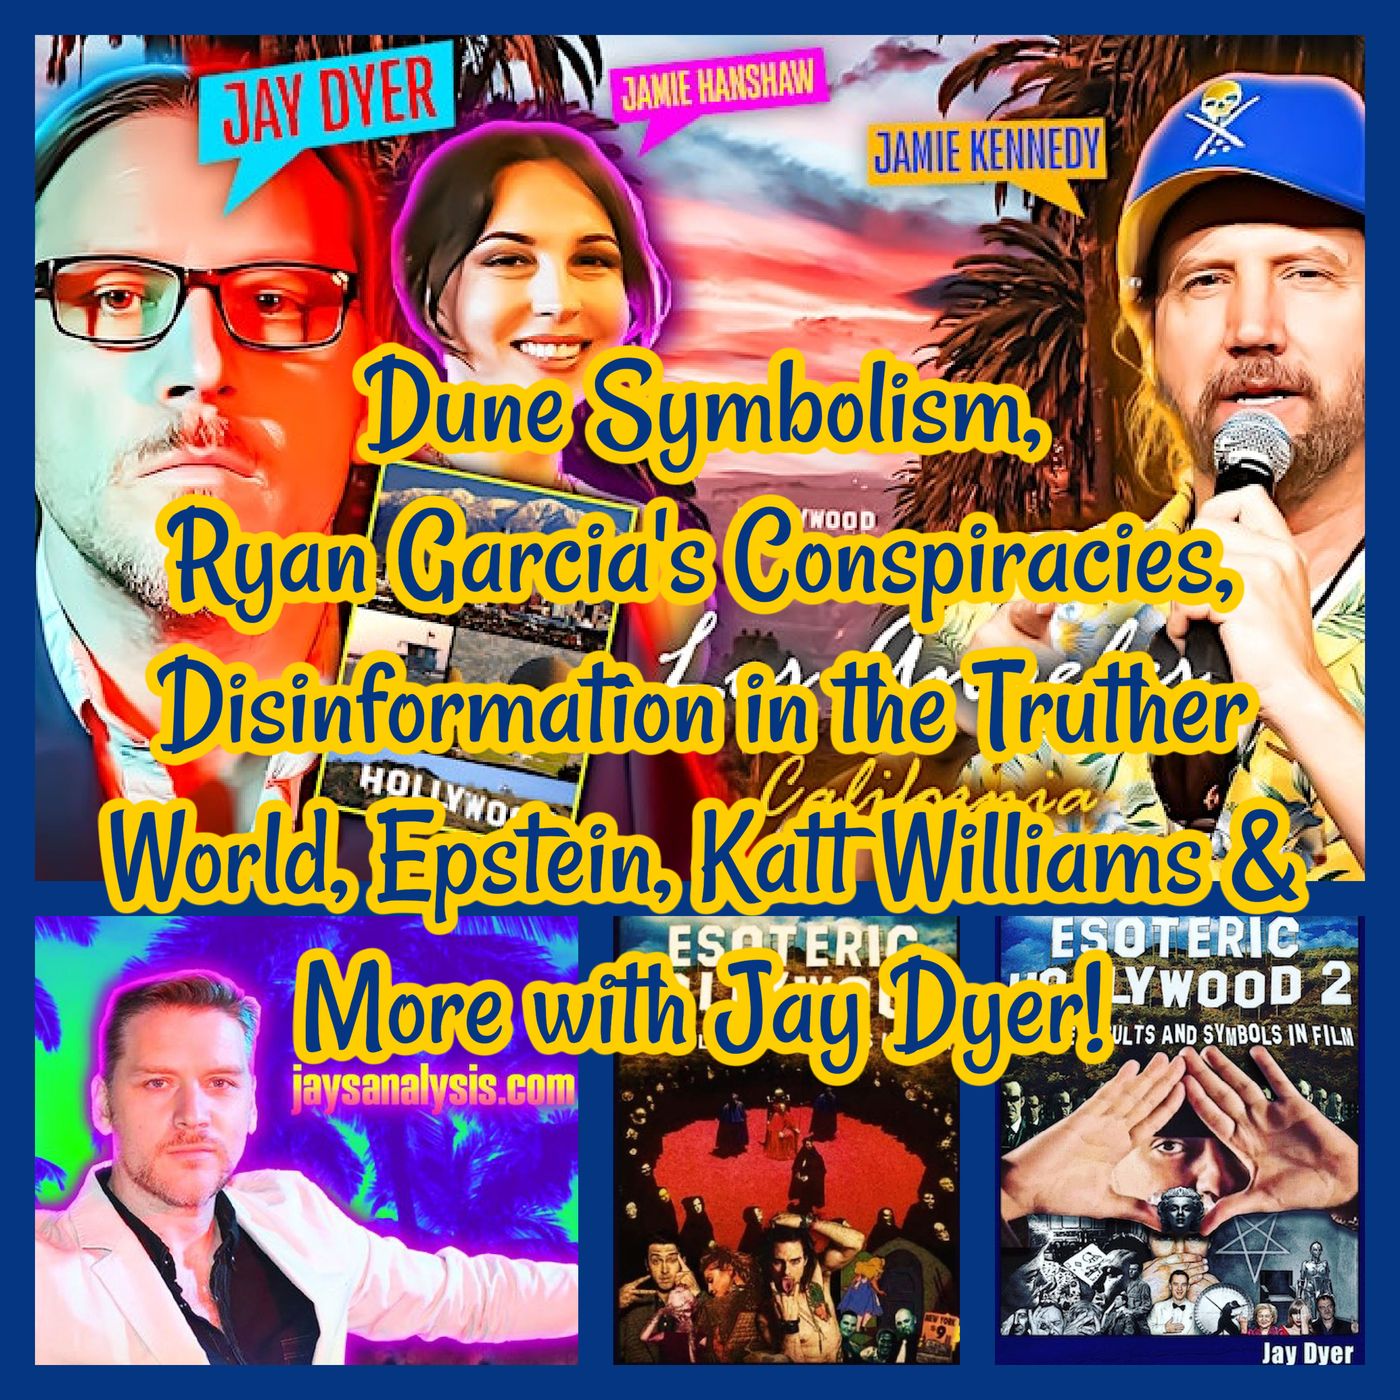 Dune Symbolism, Ryan Garcia’s Conspiracies, Disinformation in the Truther World, Epstein, Katt Williams & More with Jay Dyer!